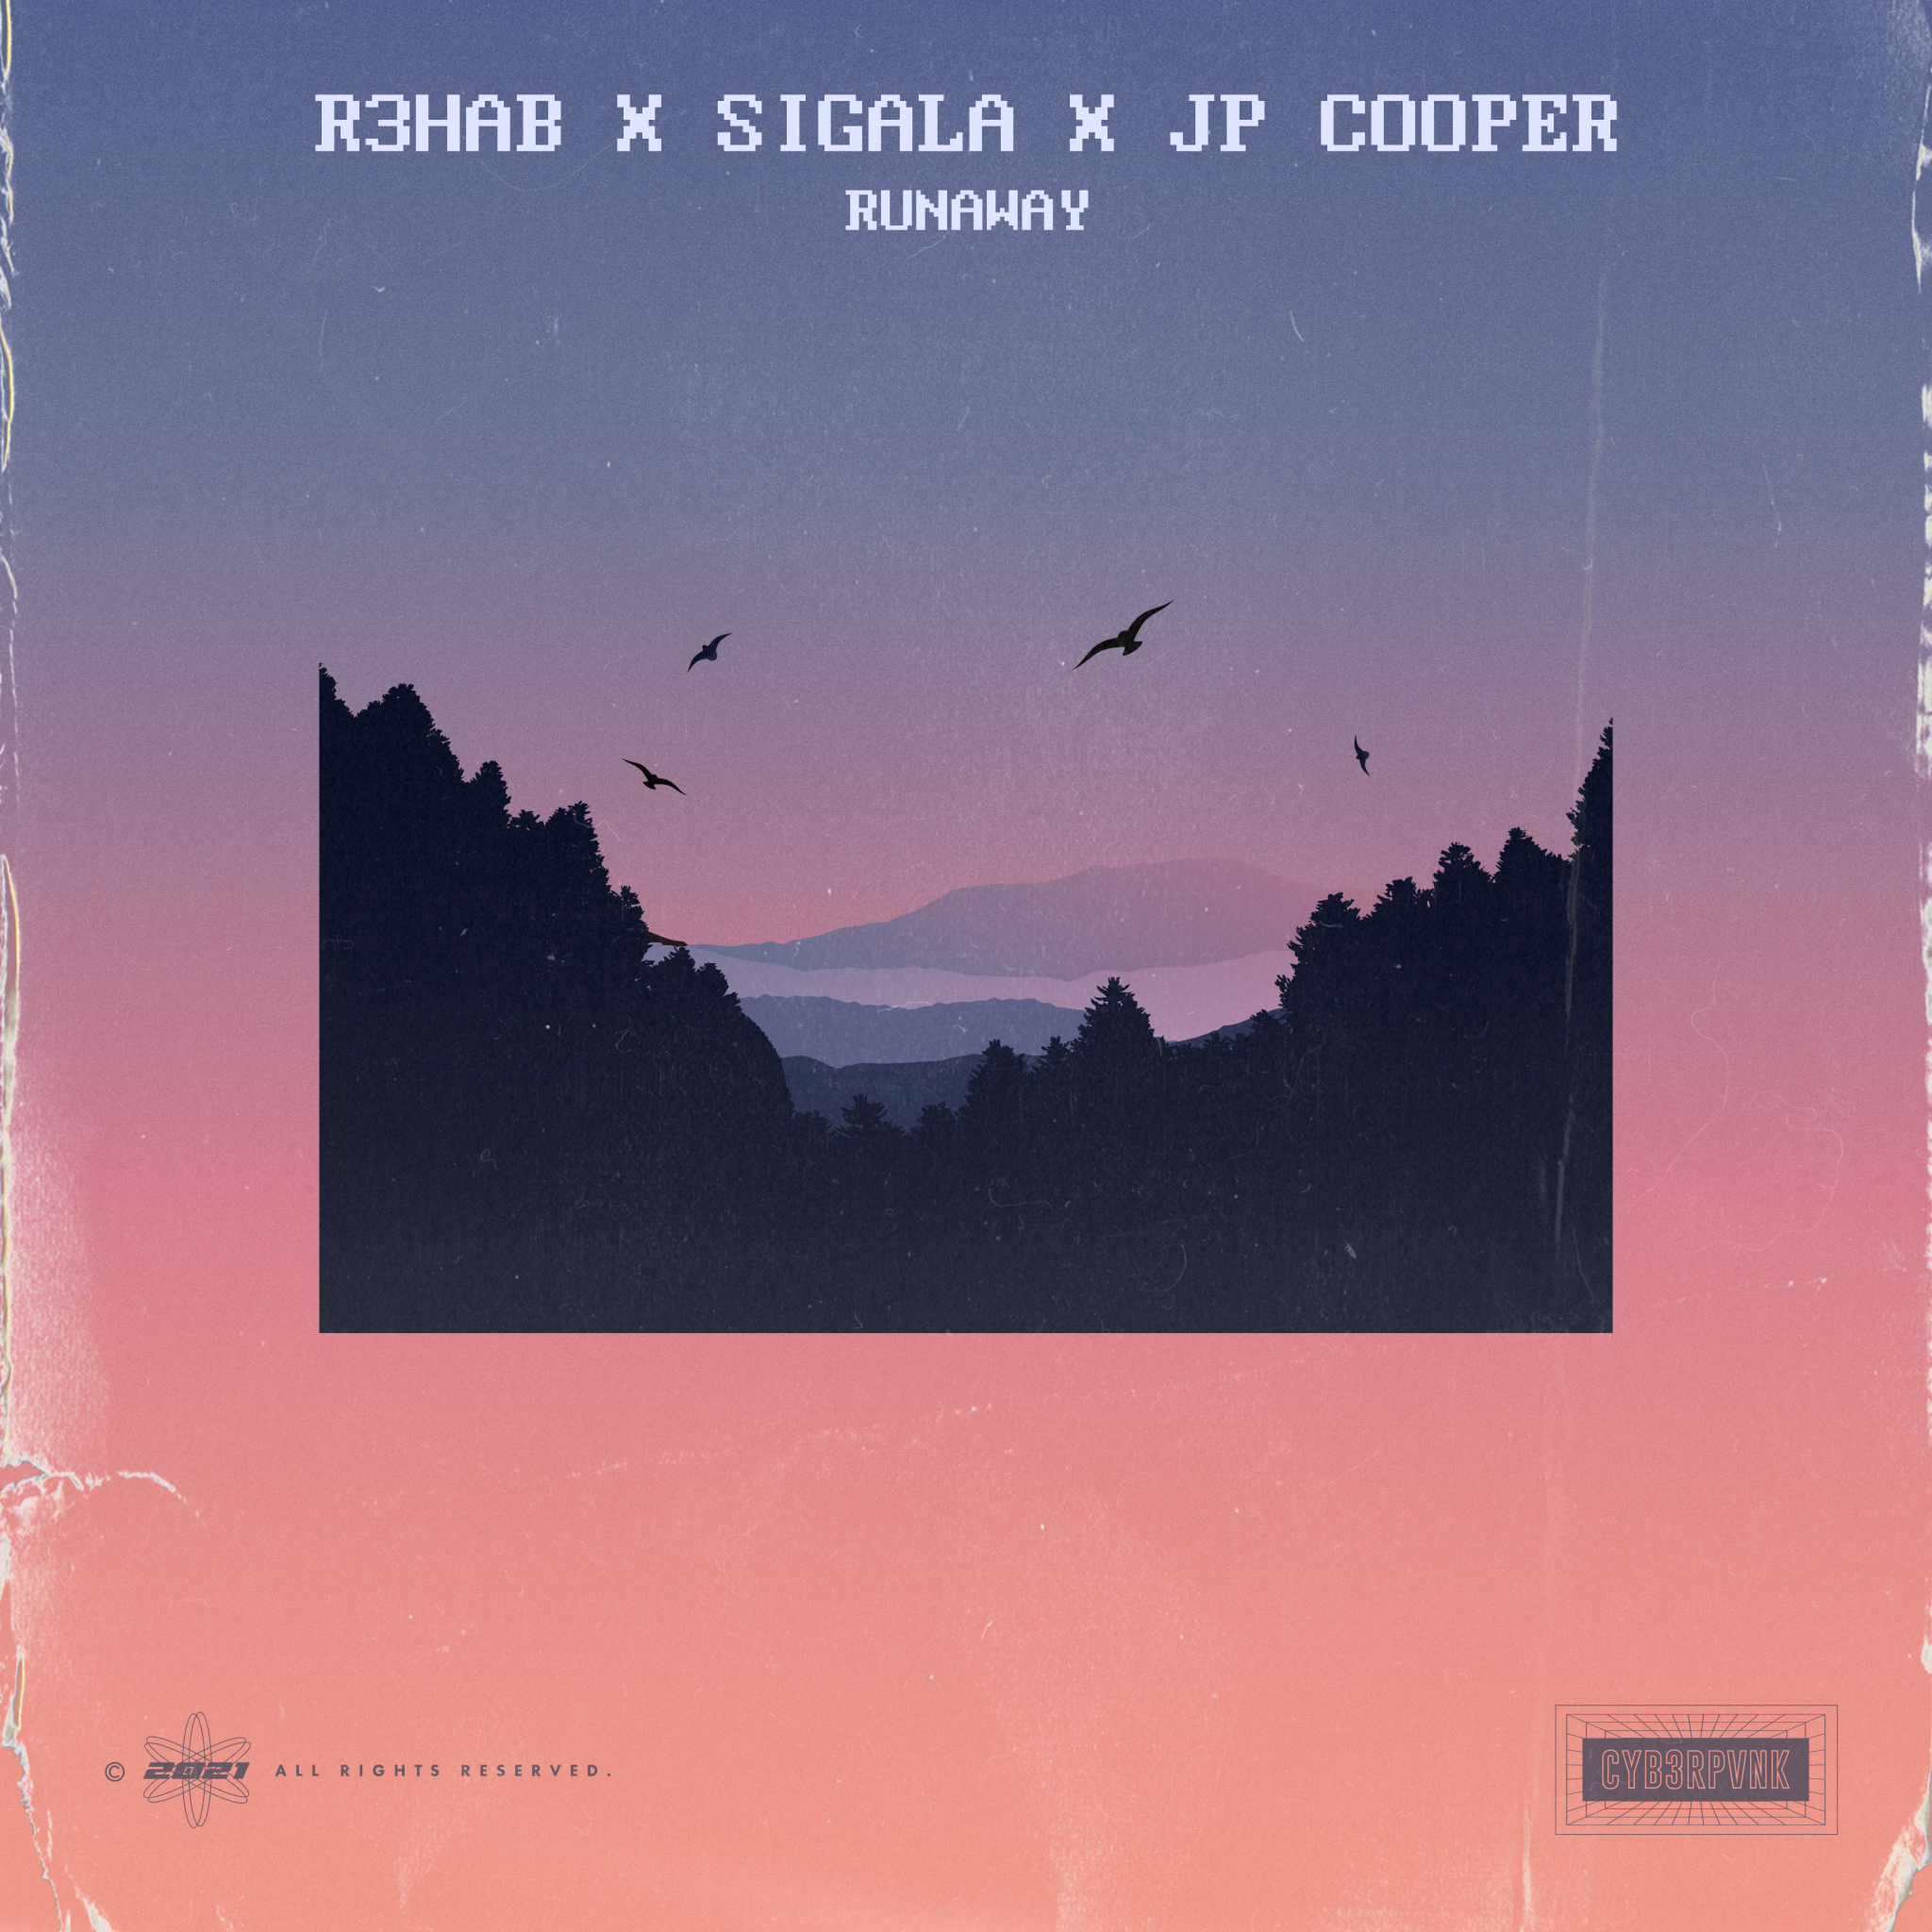 R3HAB Teams Up With Sigala & JP Cooper For Their Collaboration “Runaway”, the First Track Off R3HAB’S Forthcoming Album